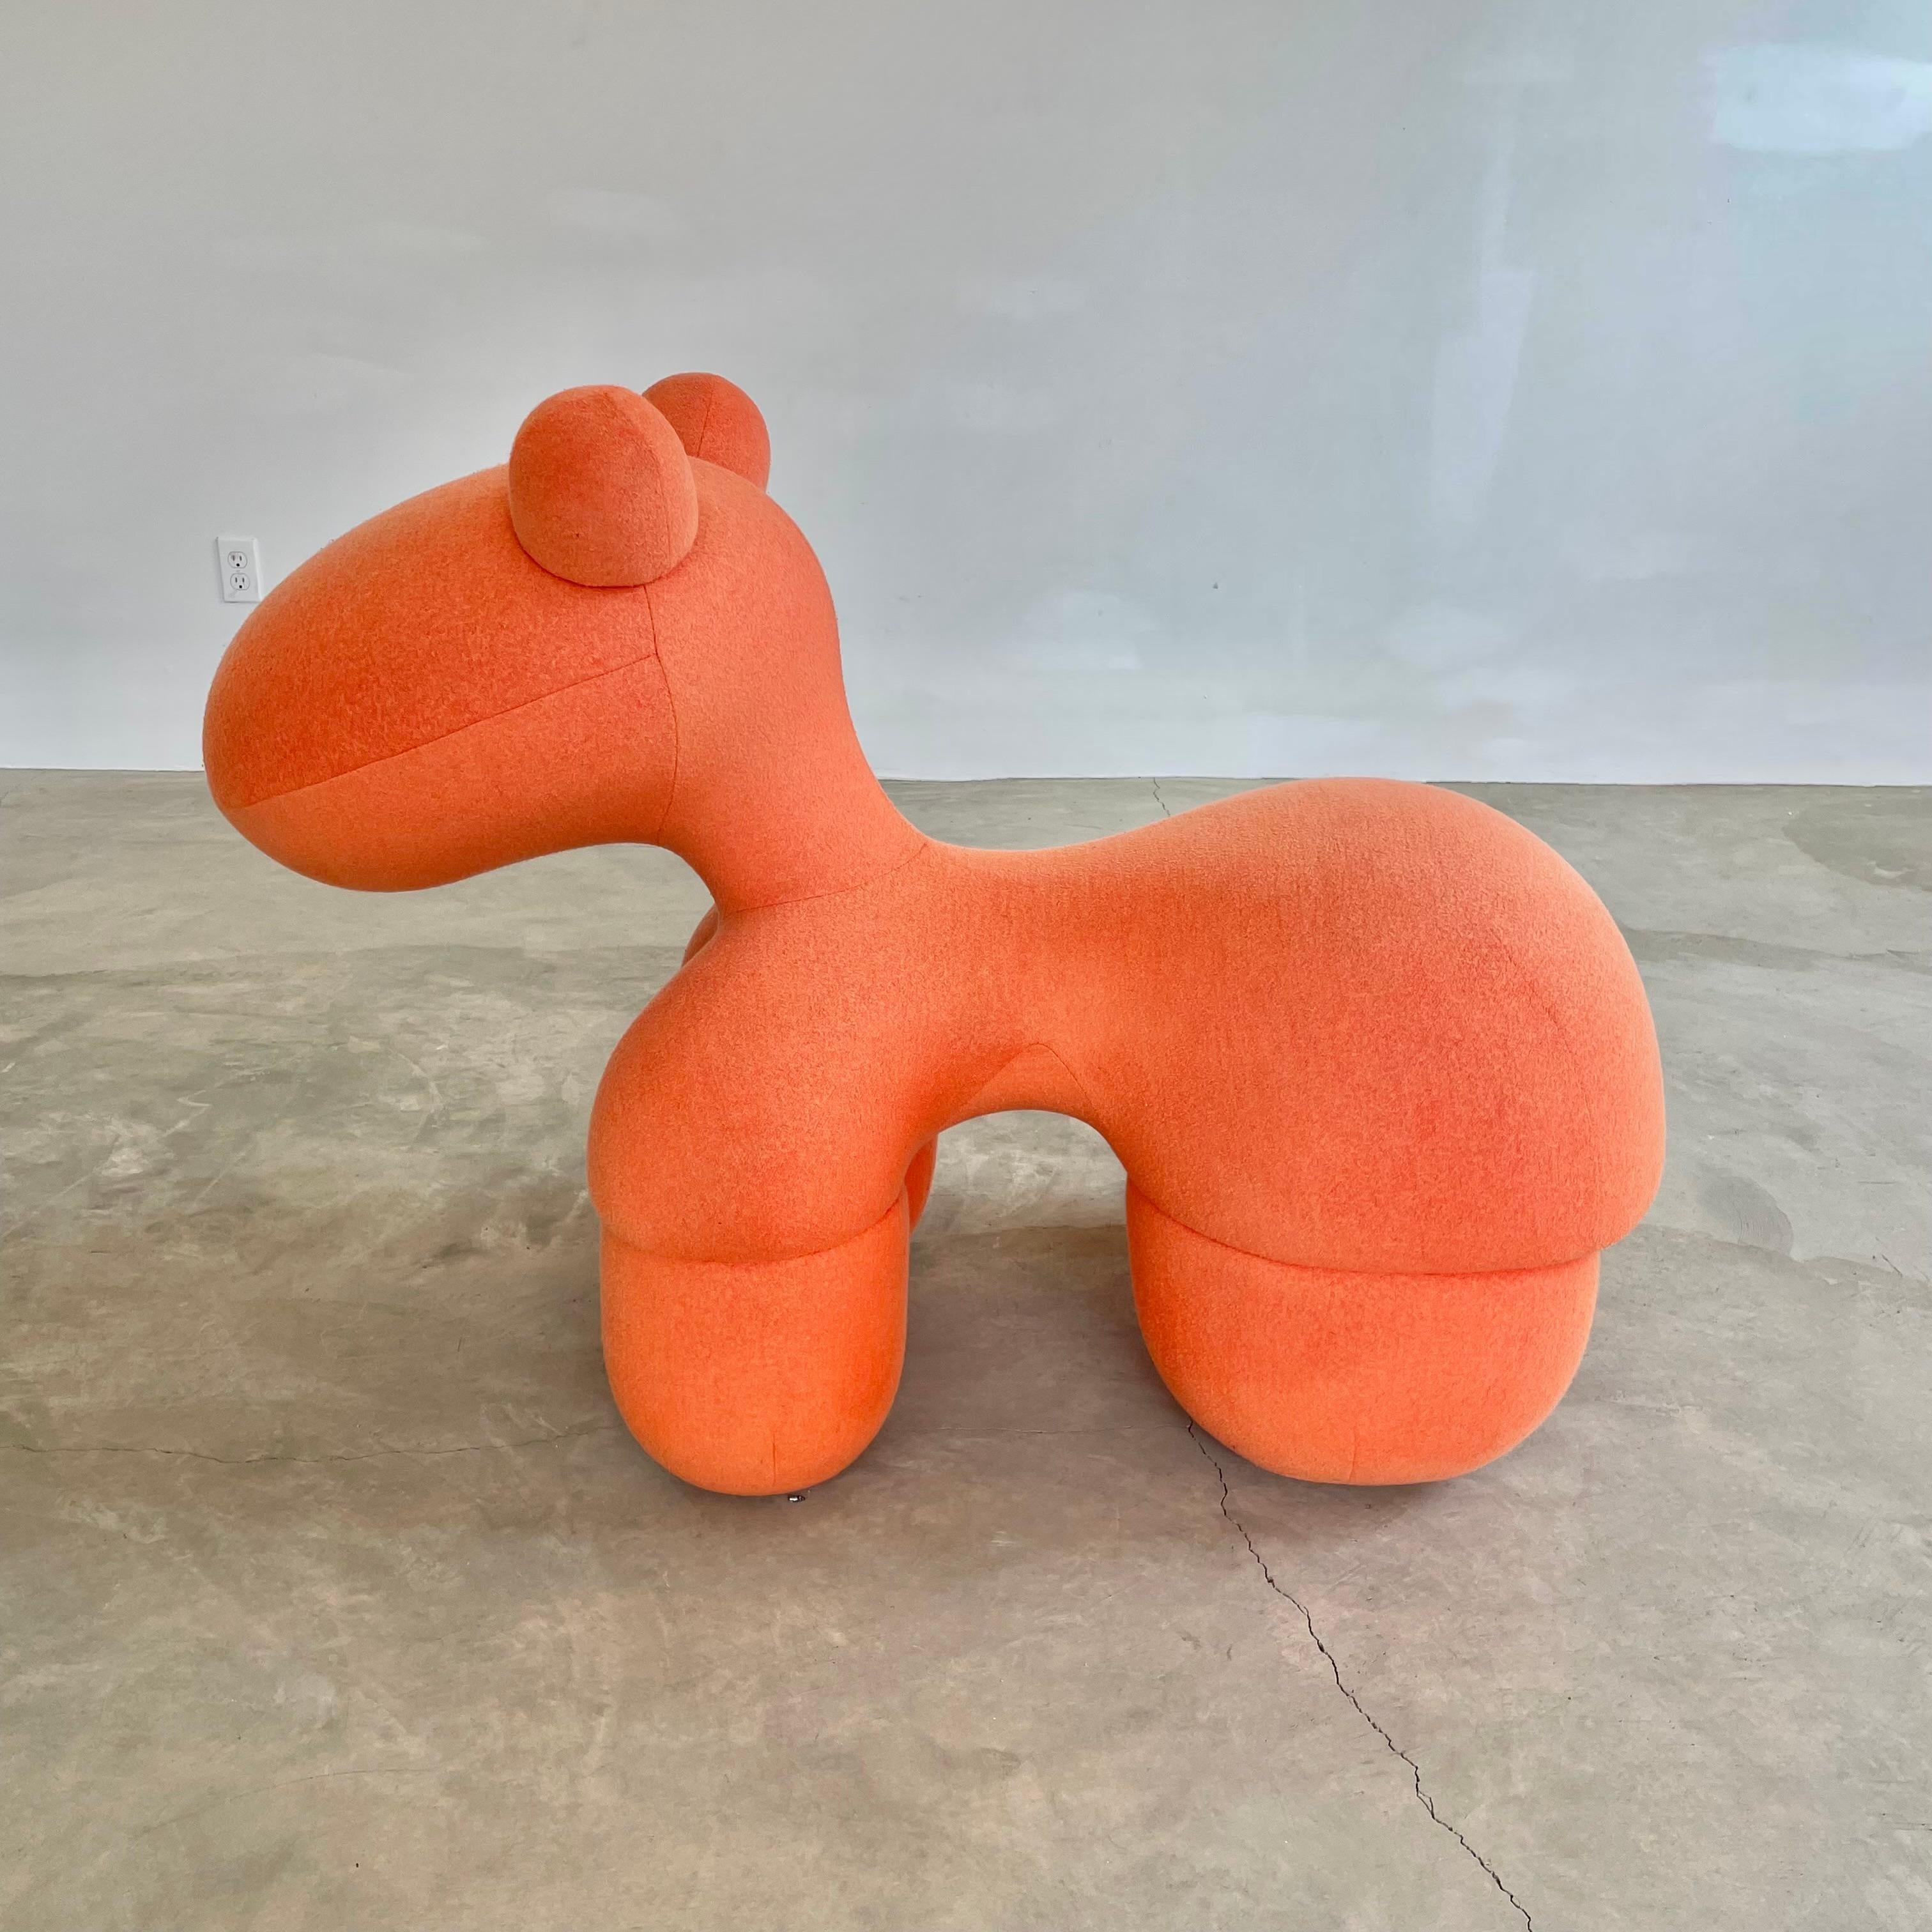 Rare, playful and iconic pony chair by designer Eero Aarnio in orange wool. The pony chair was designed by the Finnish designer in 1973 and has been a staple of contemporary design ever since. Internal metal frame. Extremely sturdy seat and an eye